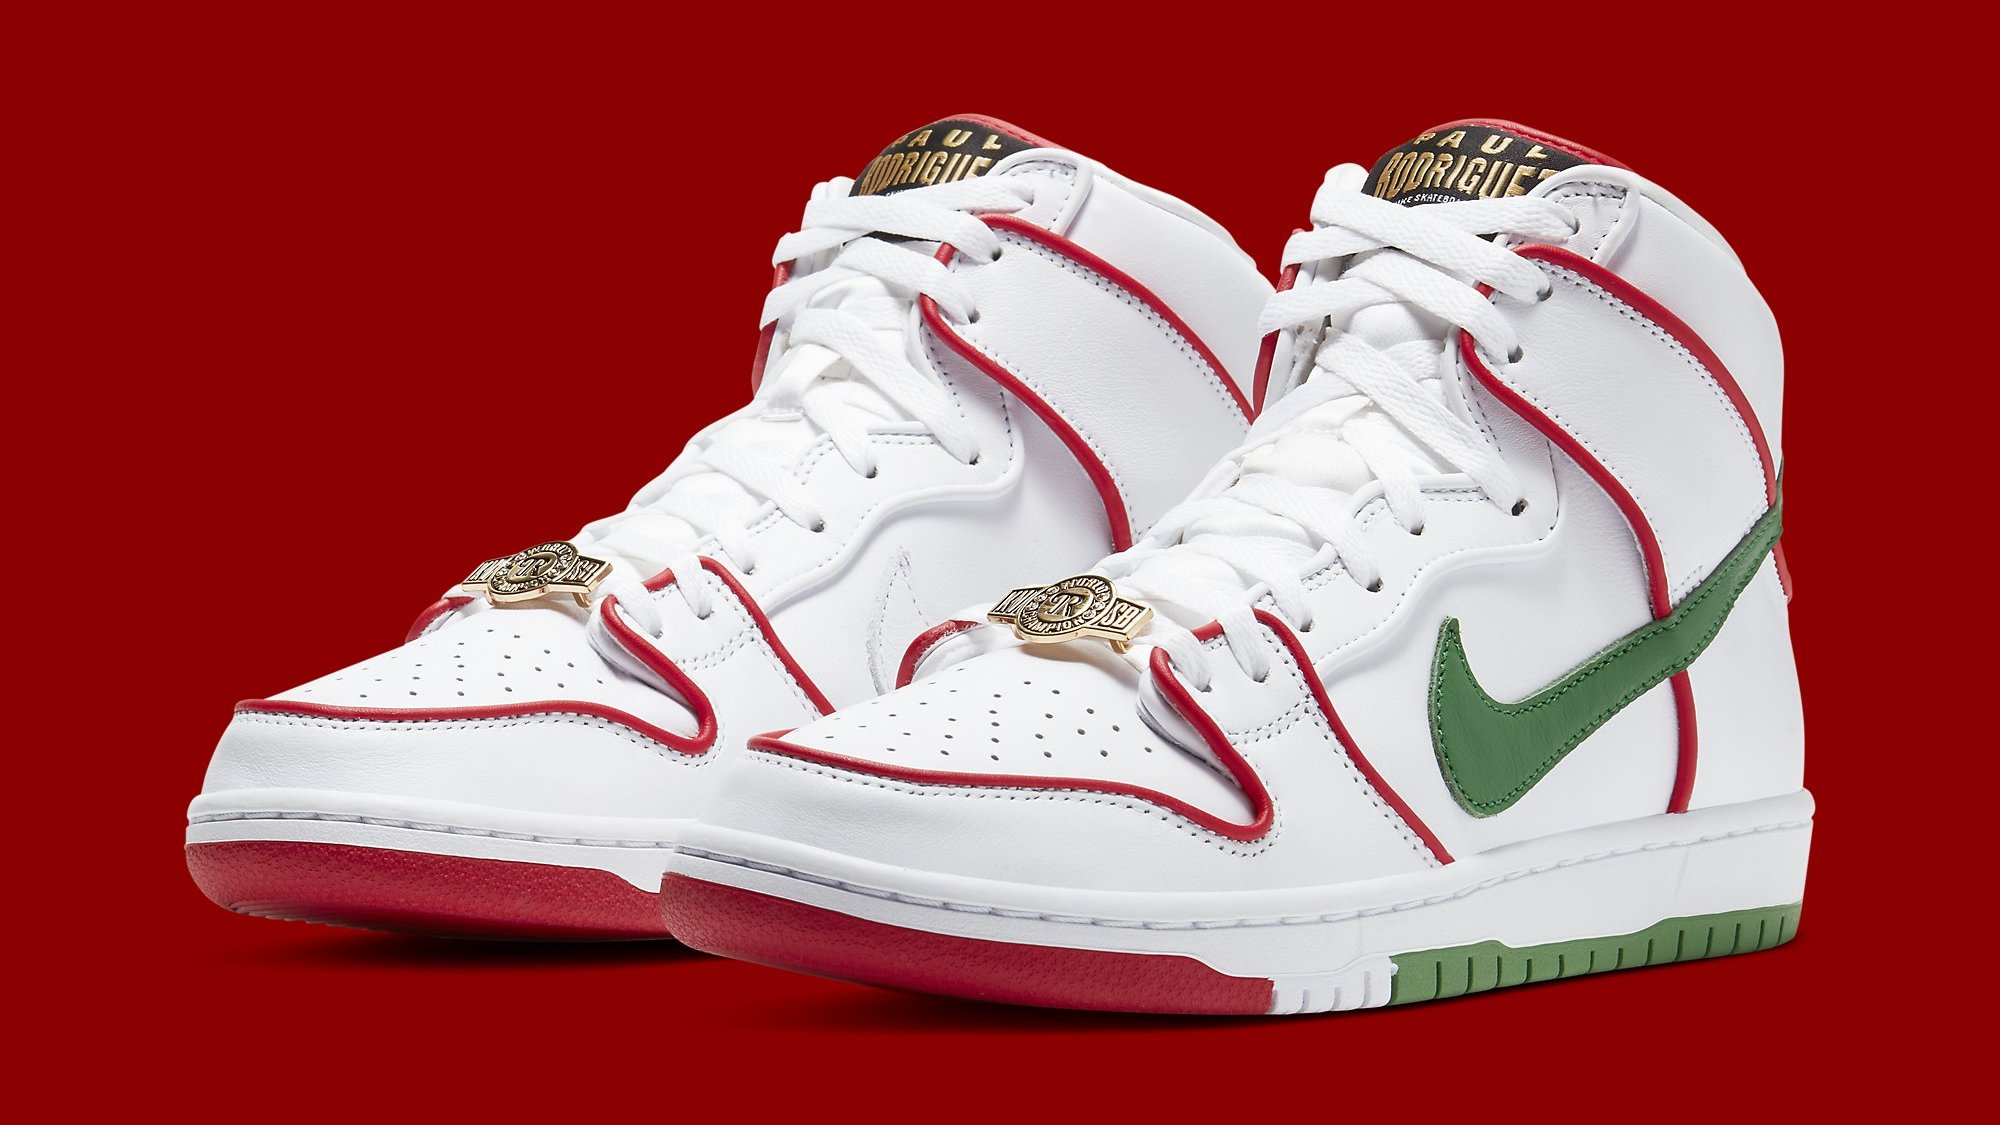 Best Look Yet at Paul Rodriguez's Latest Nike SB Dunk | Complex